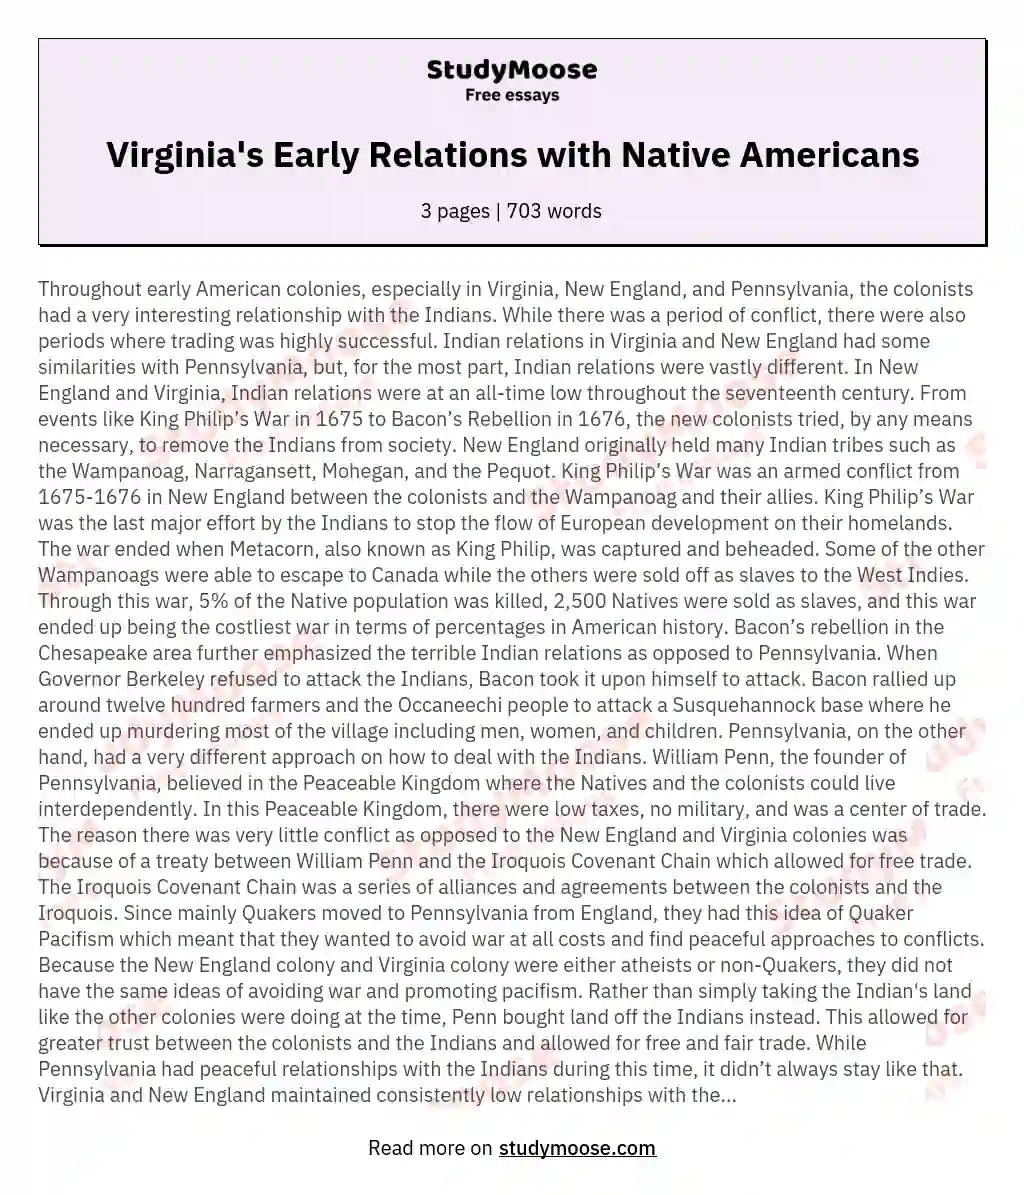 Virginia's Early Relations with Native Americans essay